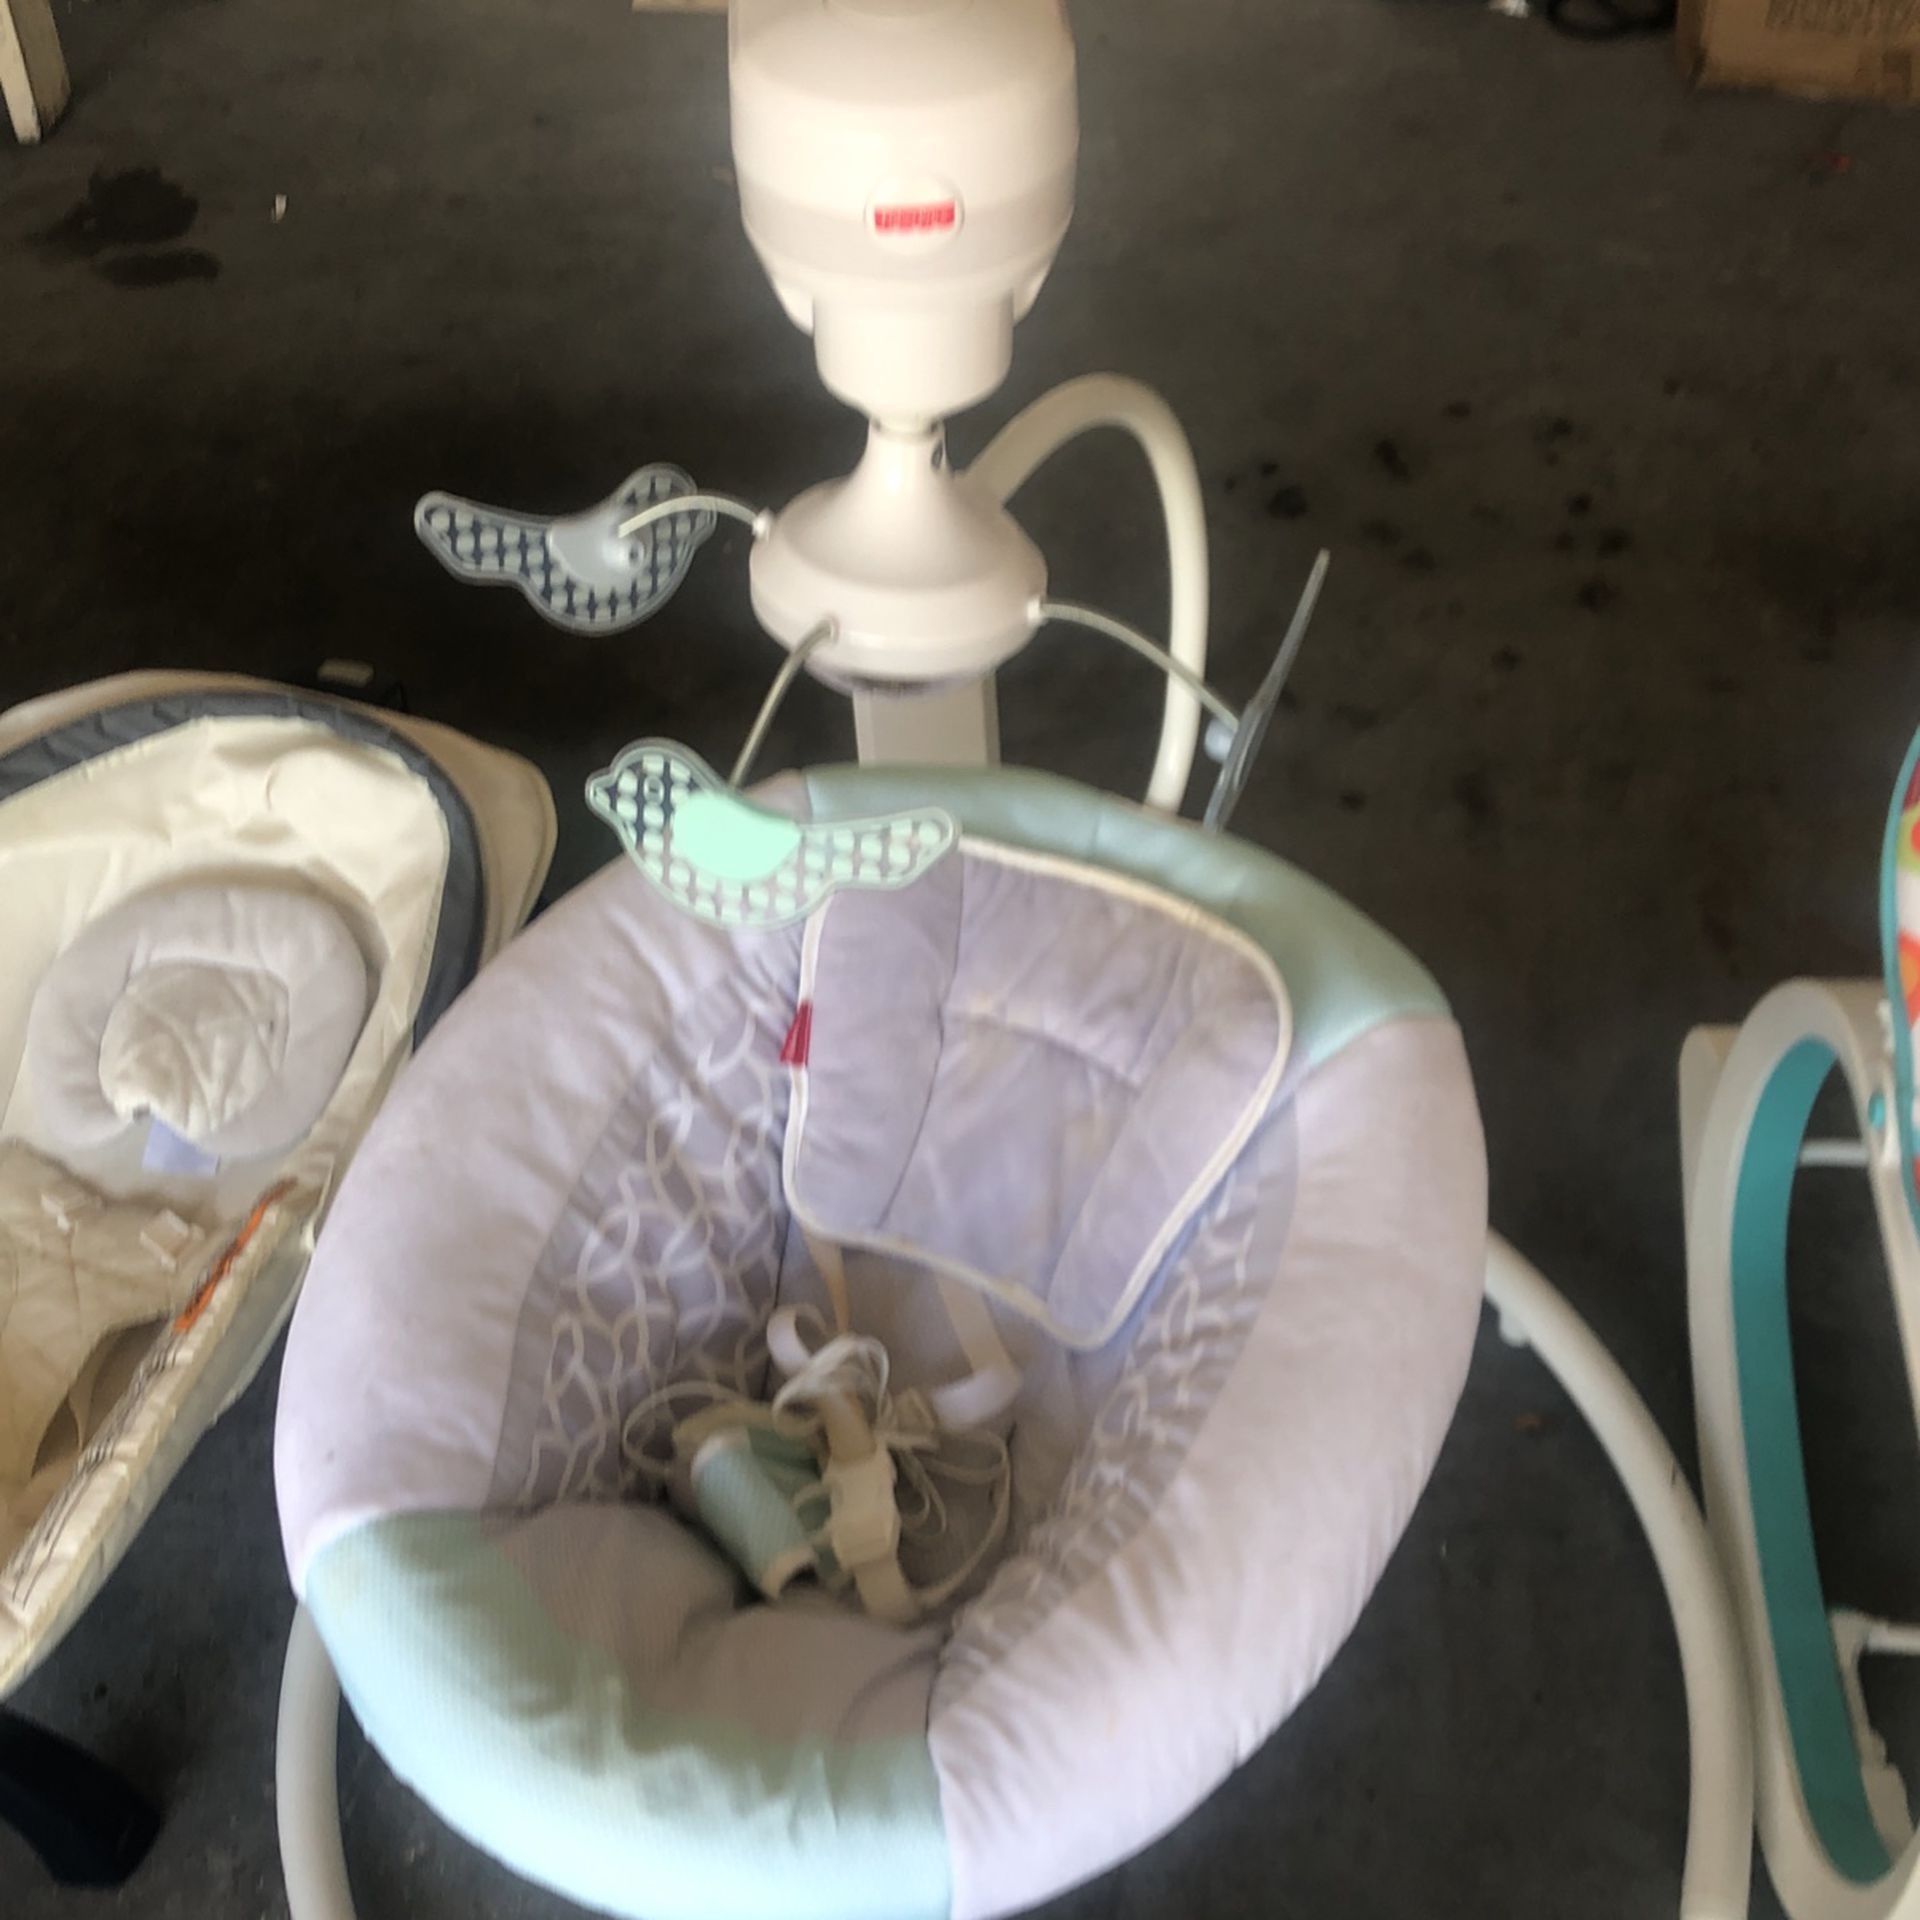 Fisher Price Swing With Music - $30